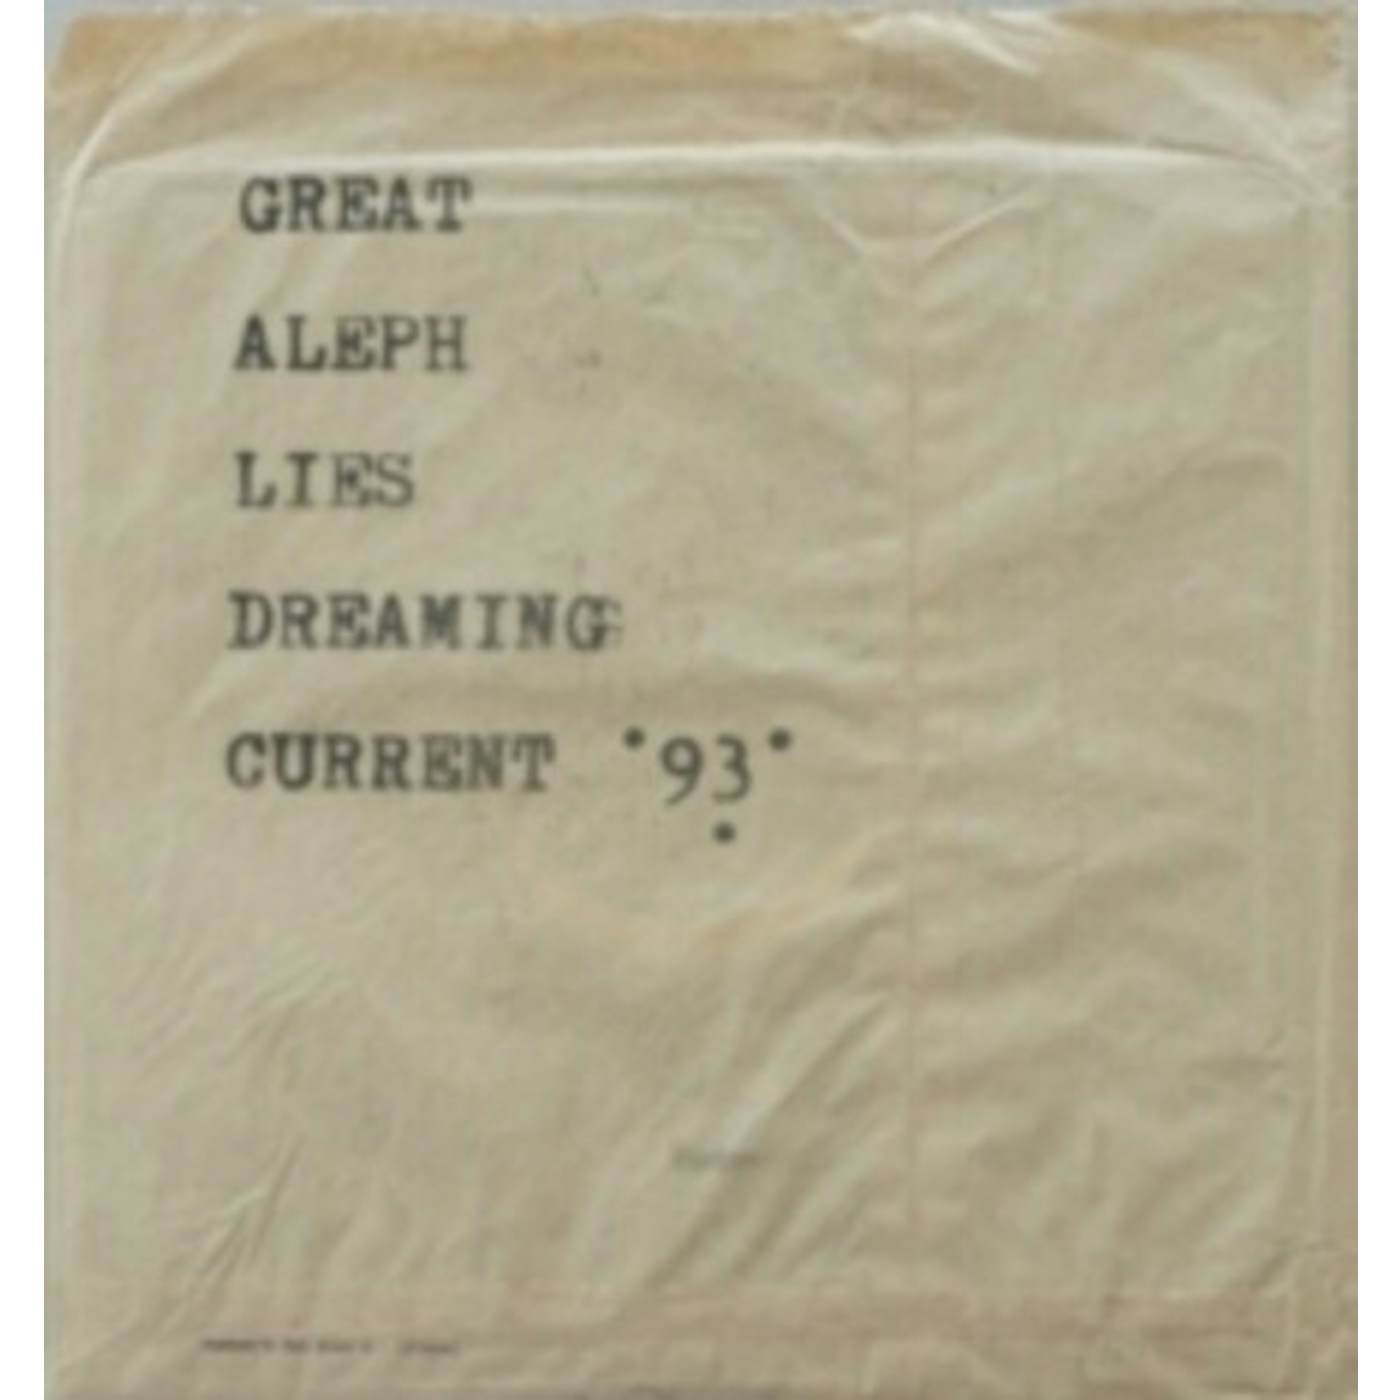 Current 93 GREAT ALEPH LIES DREAMING Vinyl Record